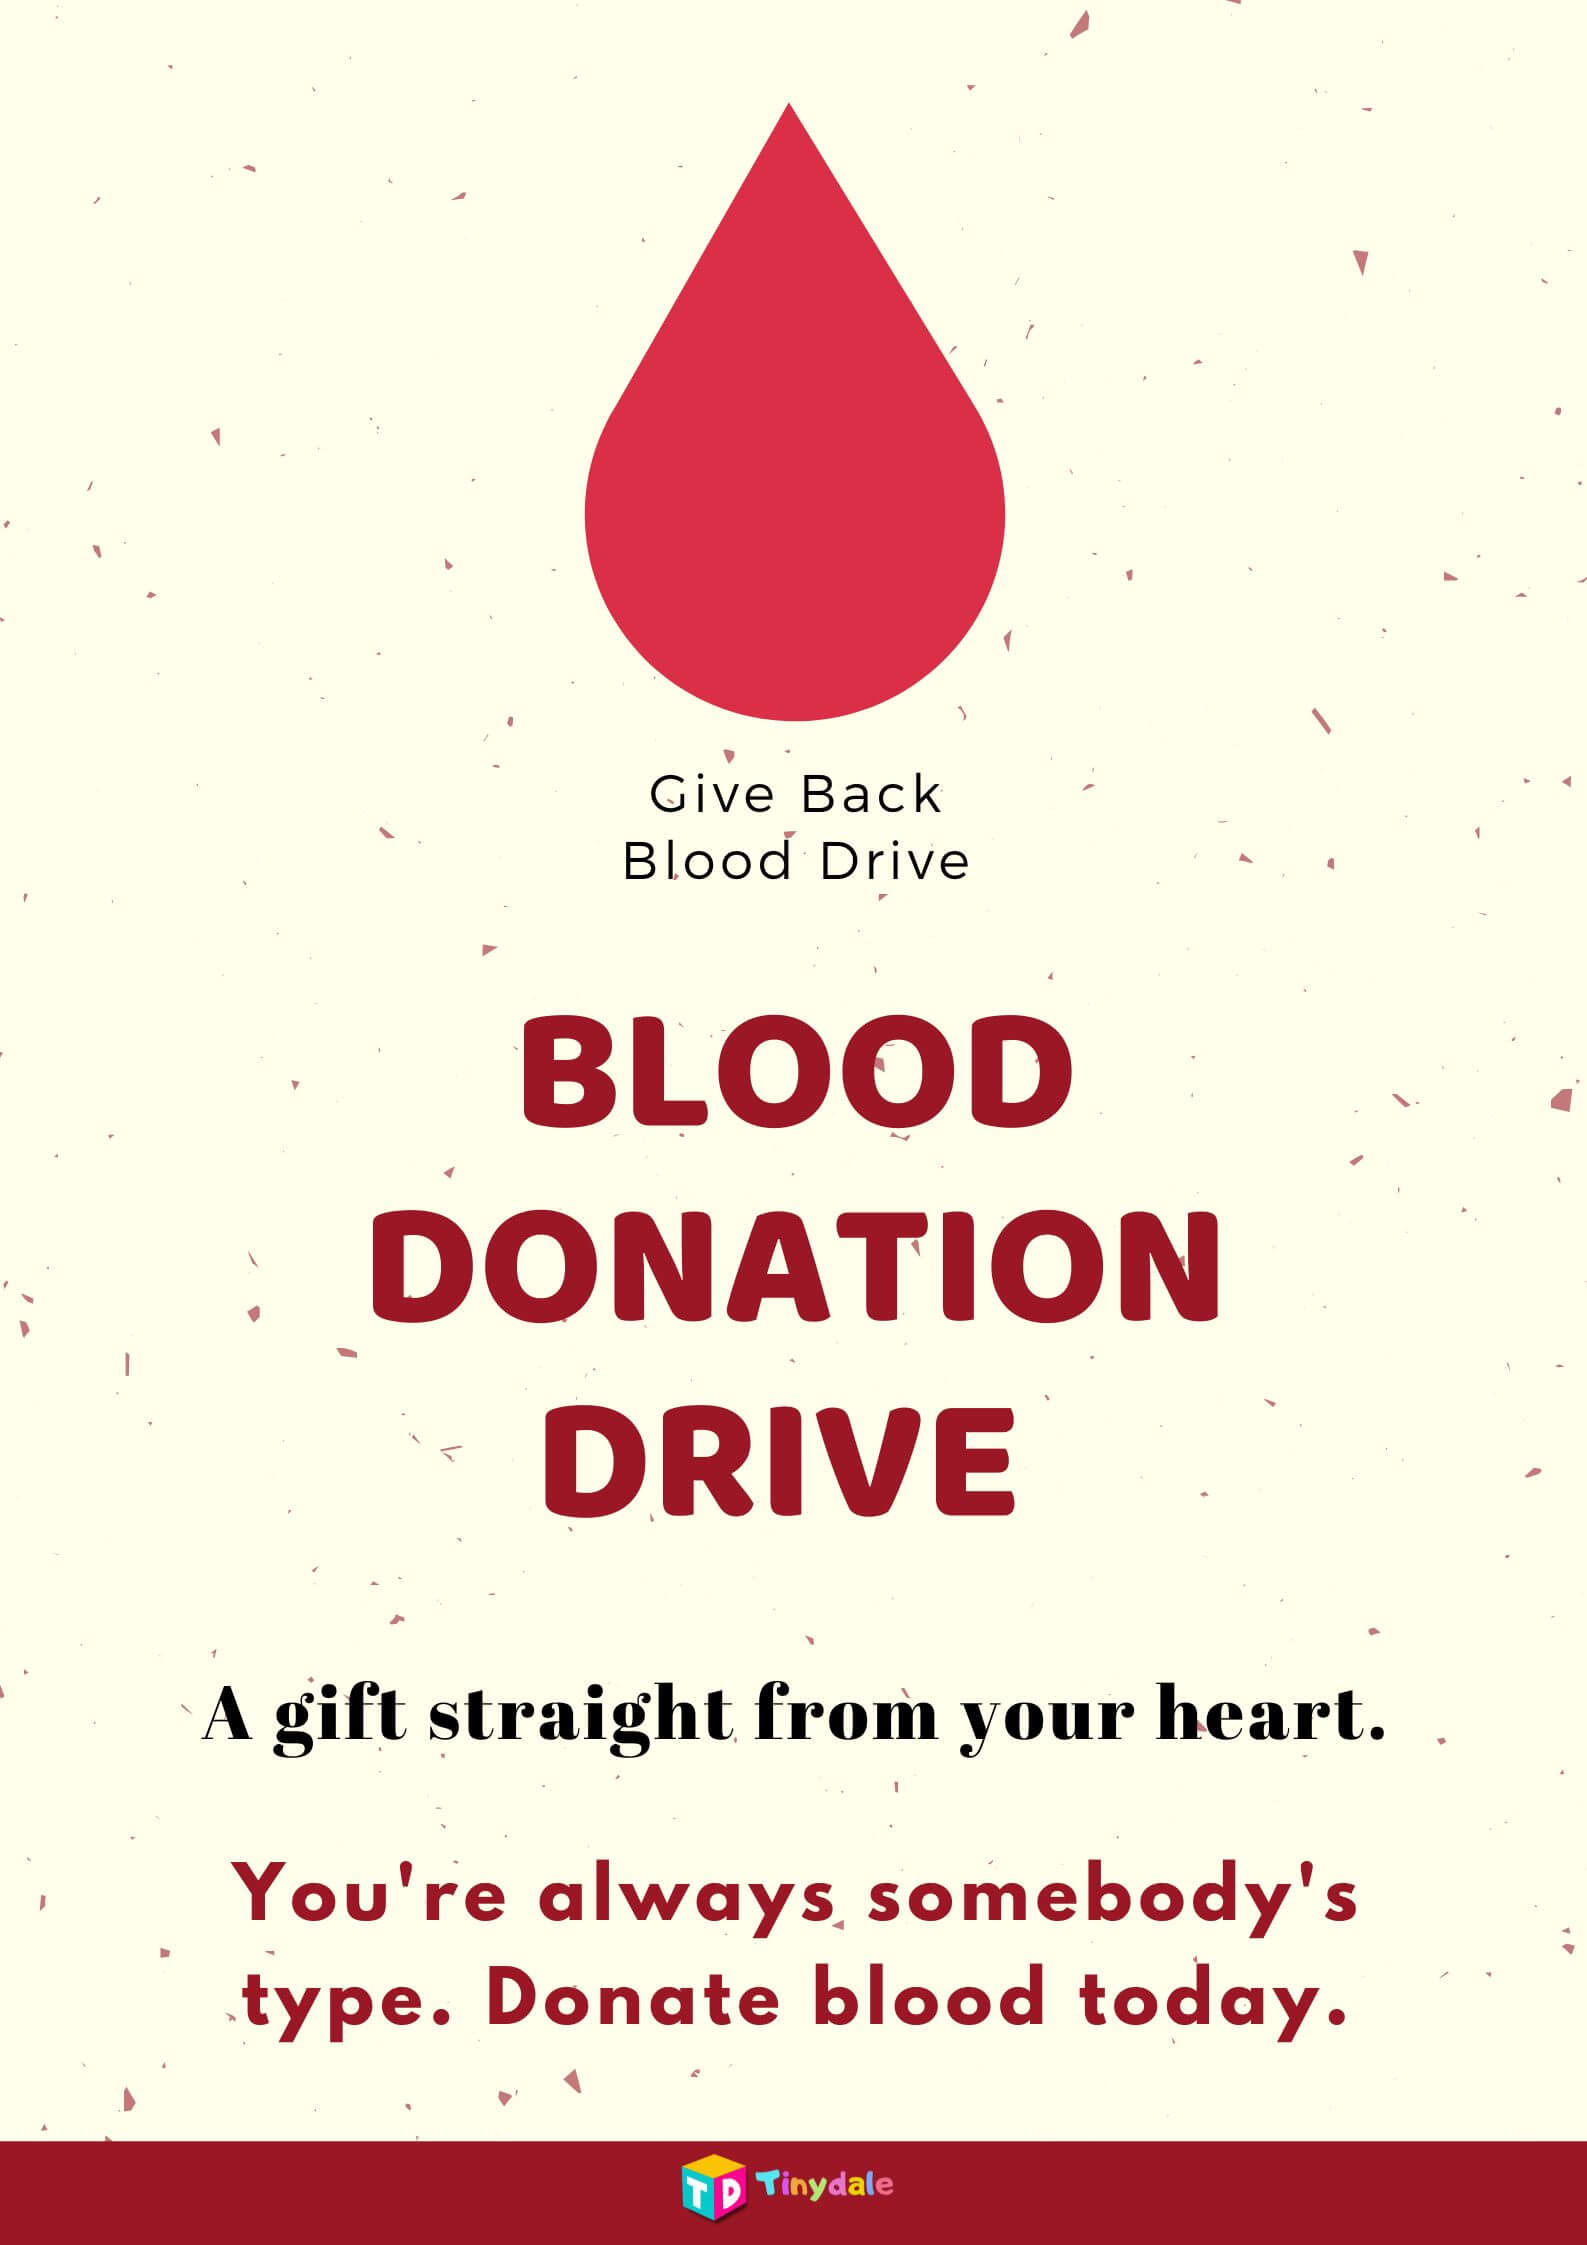 Blood Donation Day poster 1